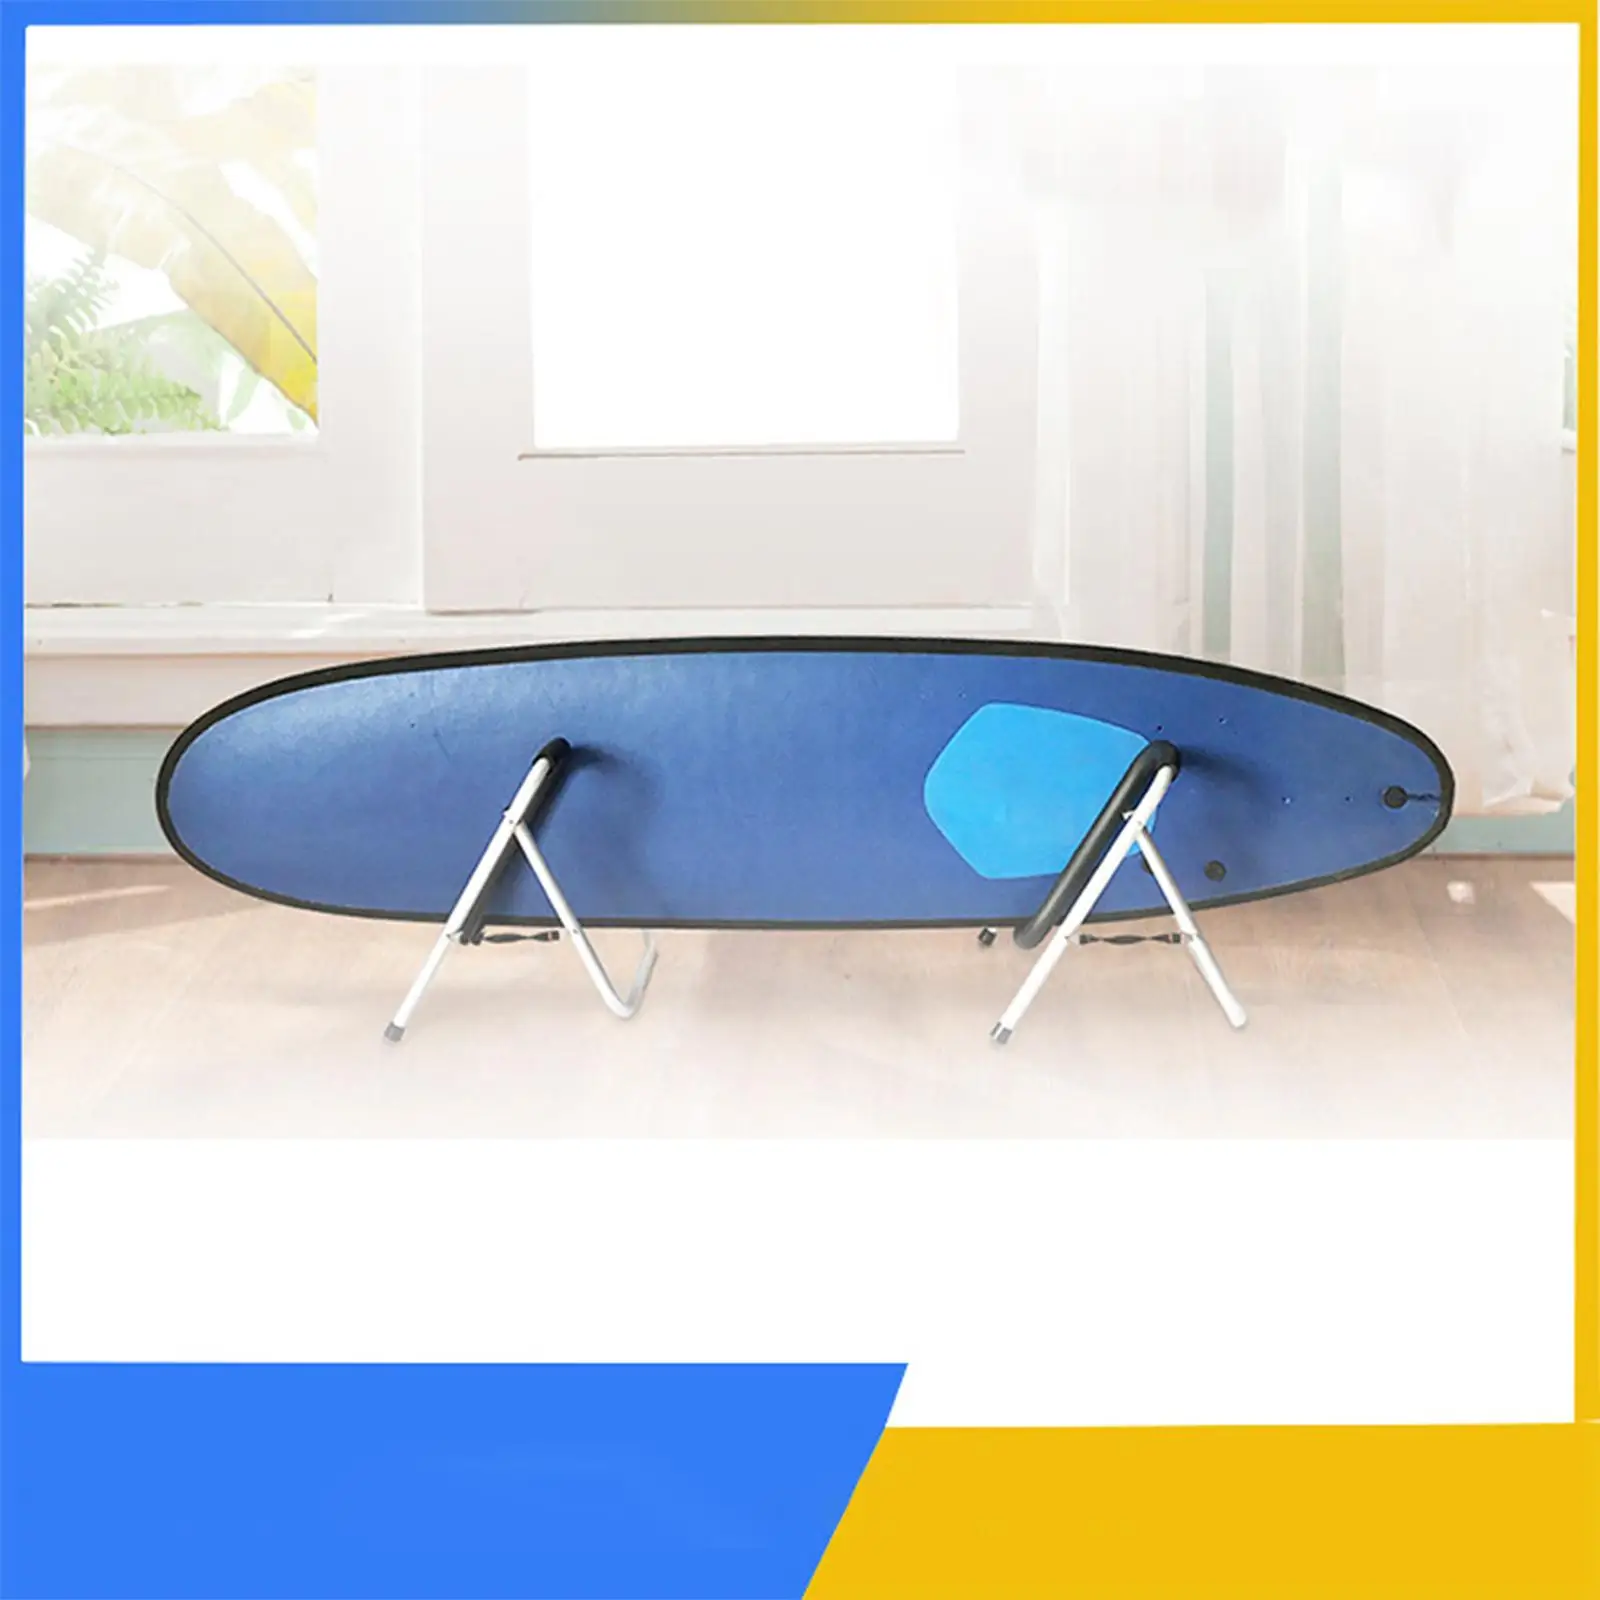 Folding Surf Board Rack Holds Longboards and Shortboards with Foam Protector